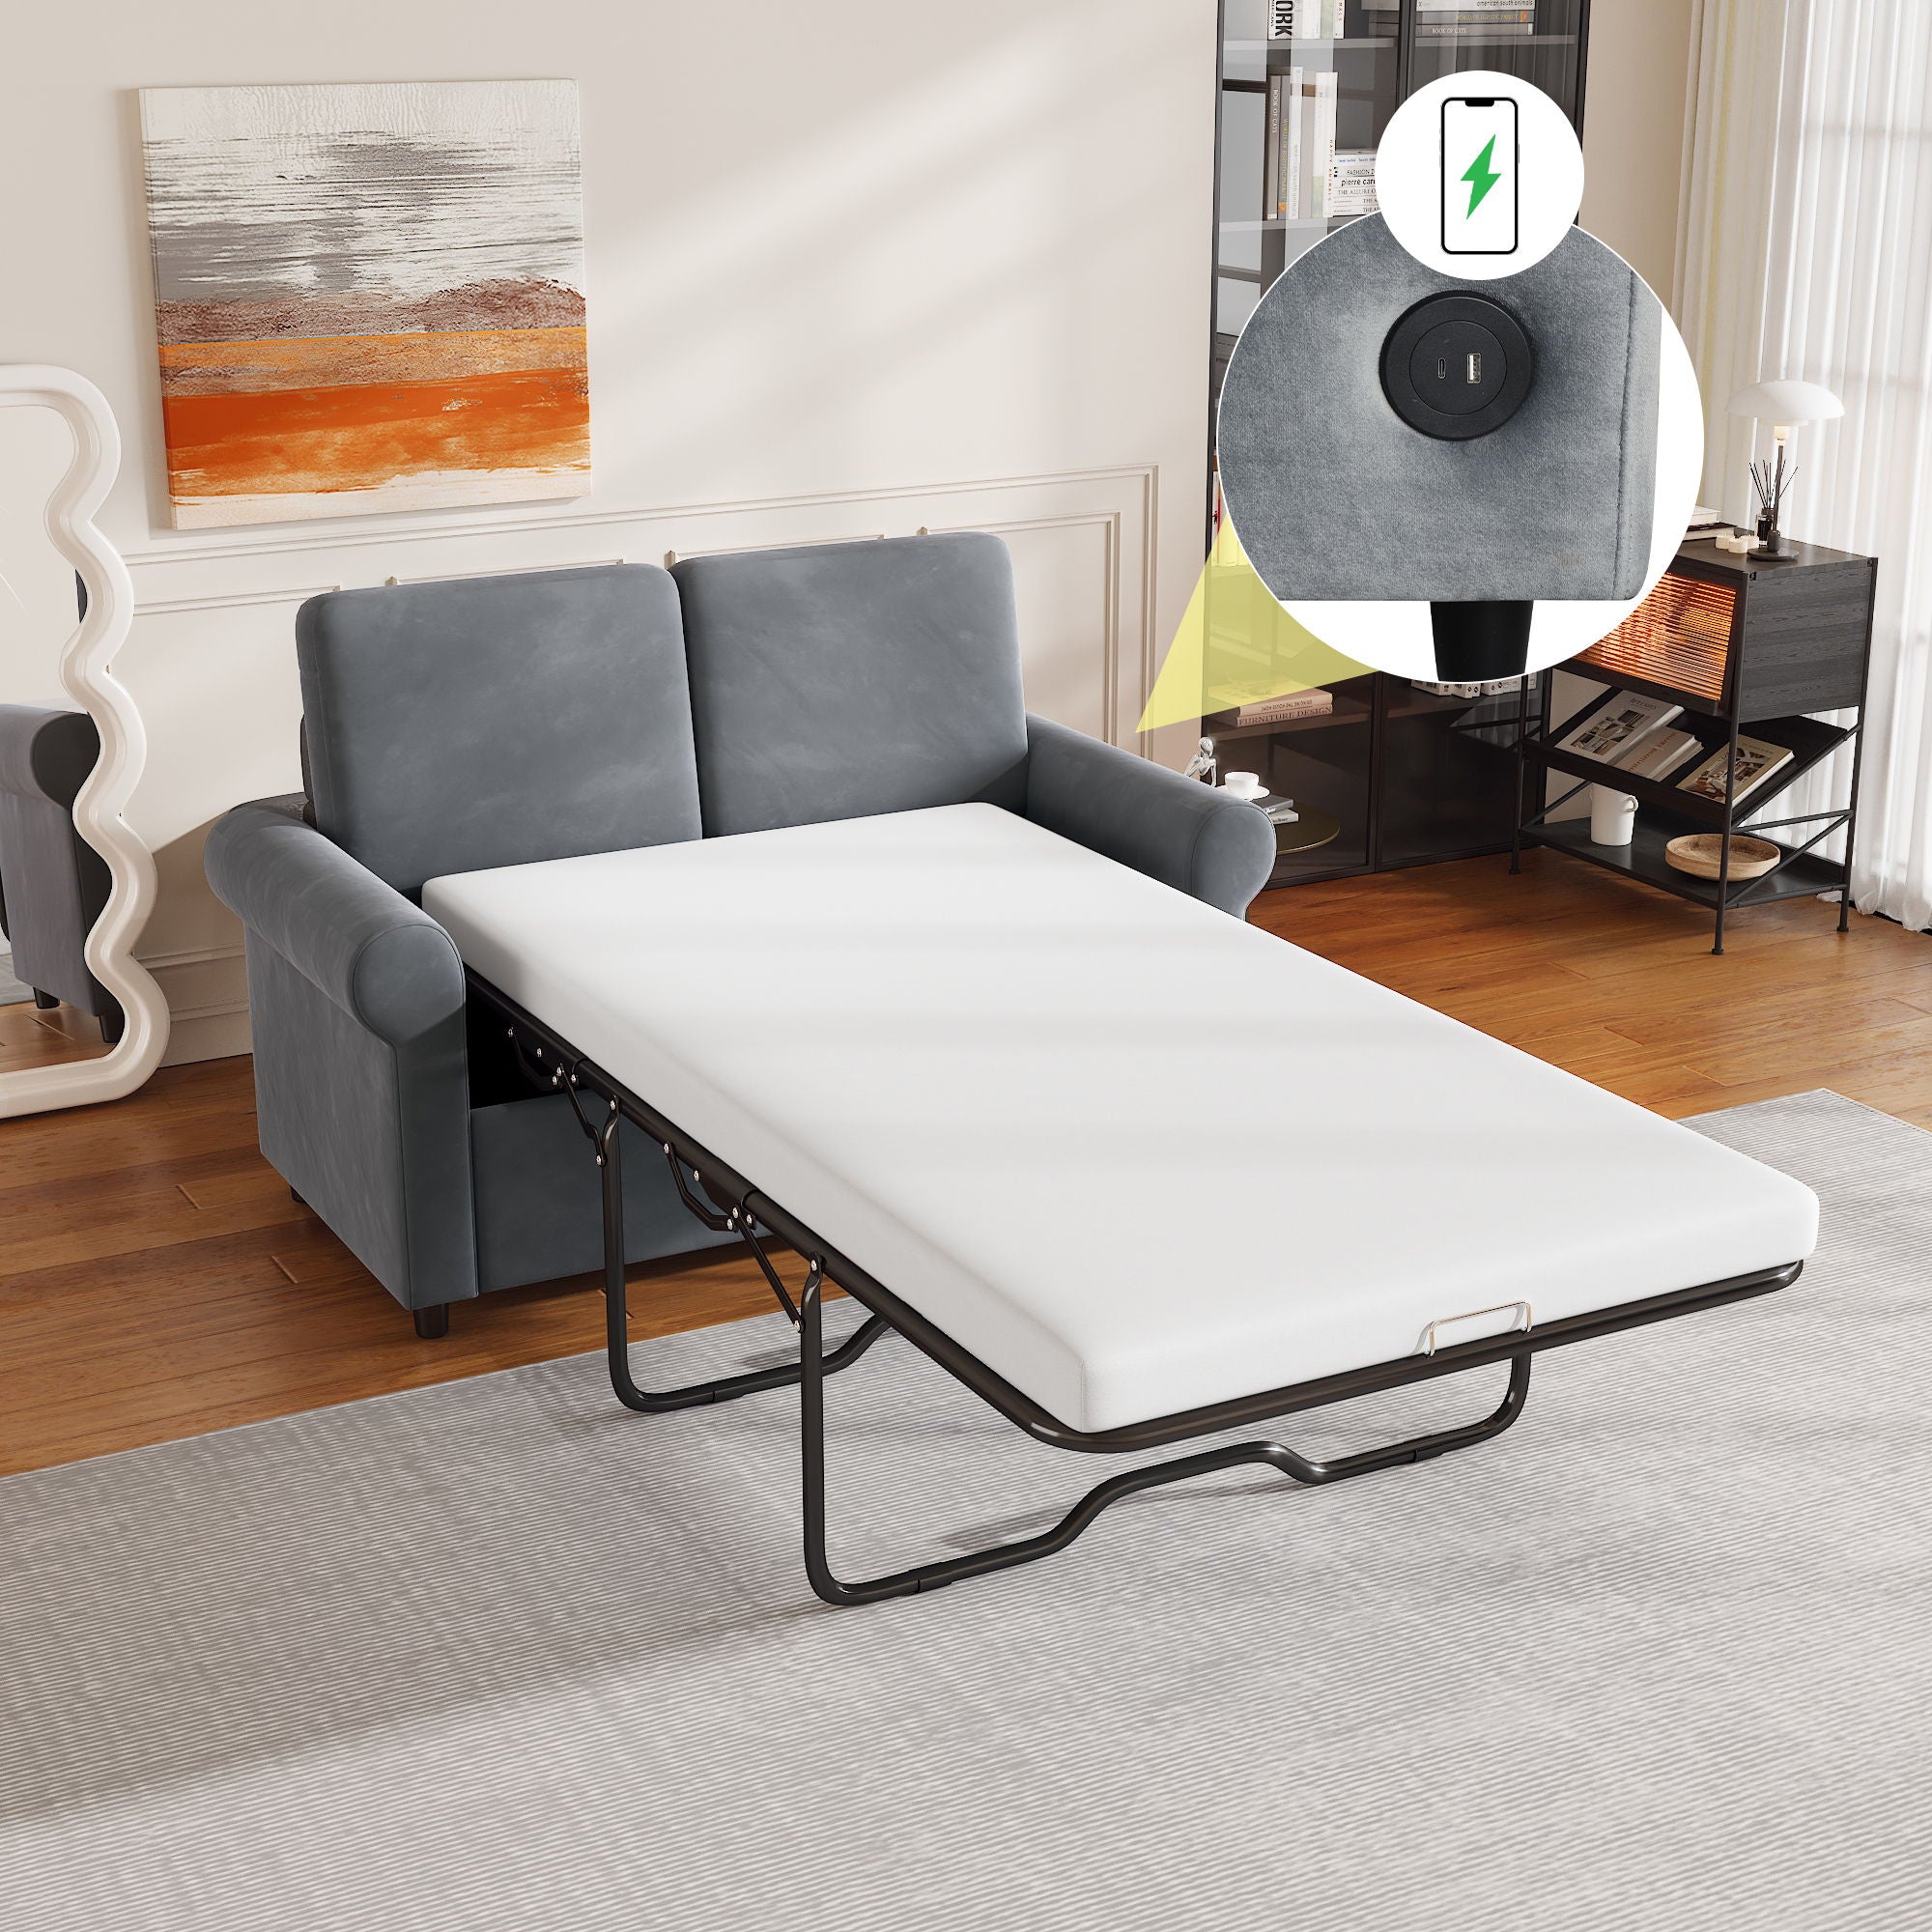 57.4" Pull Out Sofa Bed, Sleeper Sofa Bed With Premium Twin Size Mattress Pad, 2 In 1 Pull Out Couch Bed With Two USB Ports For Living Room, Small Apartment, Gray (Old Sku:Wf296899)